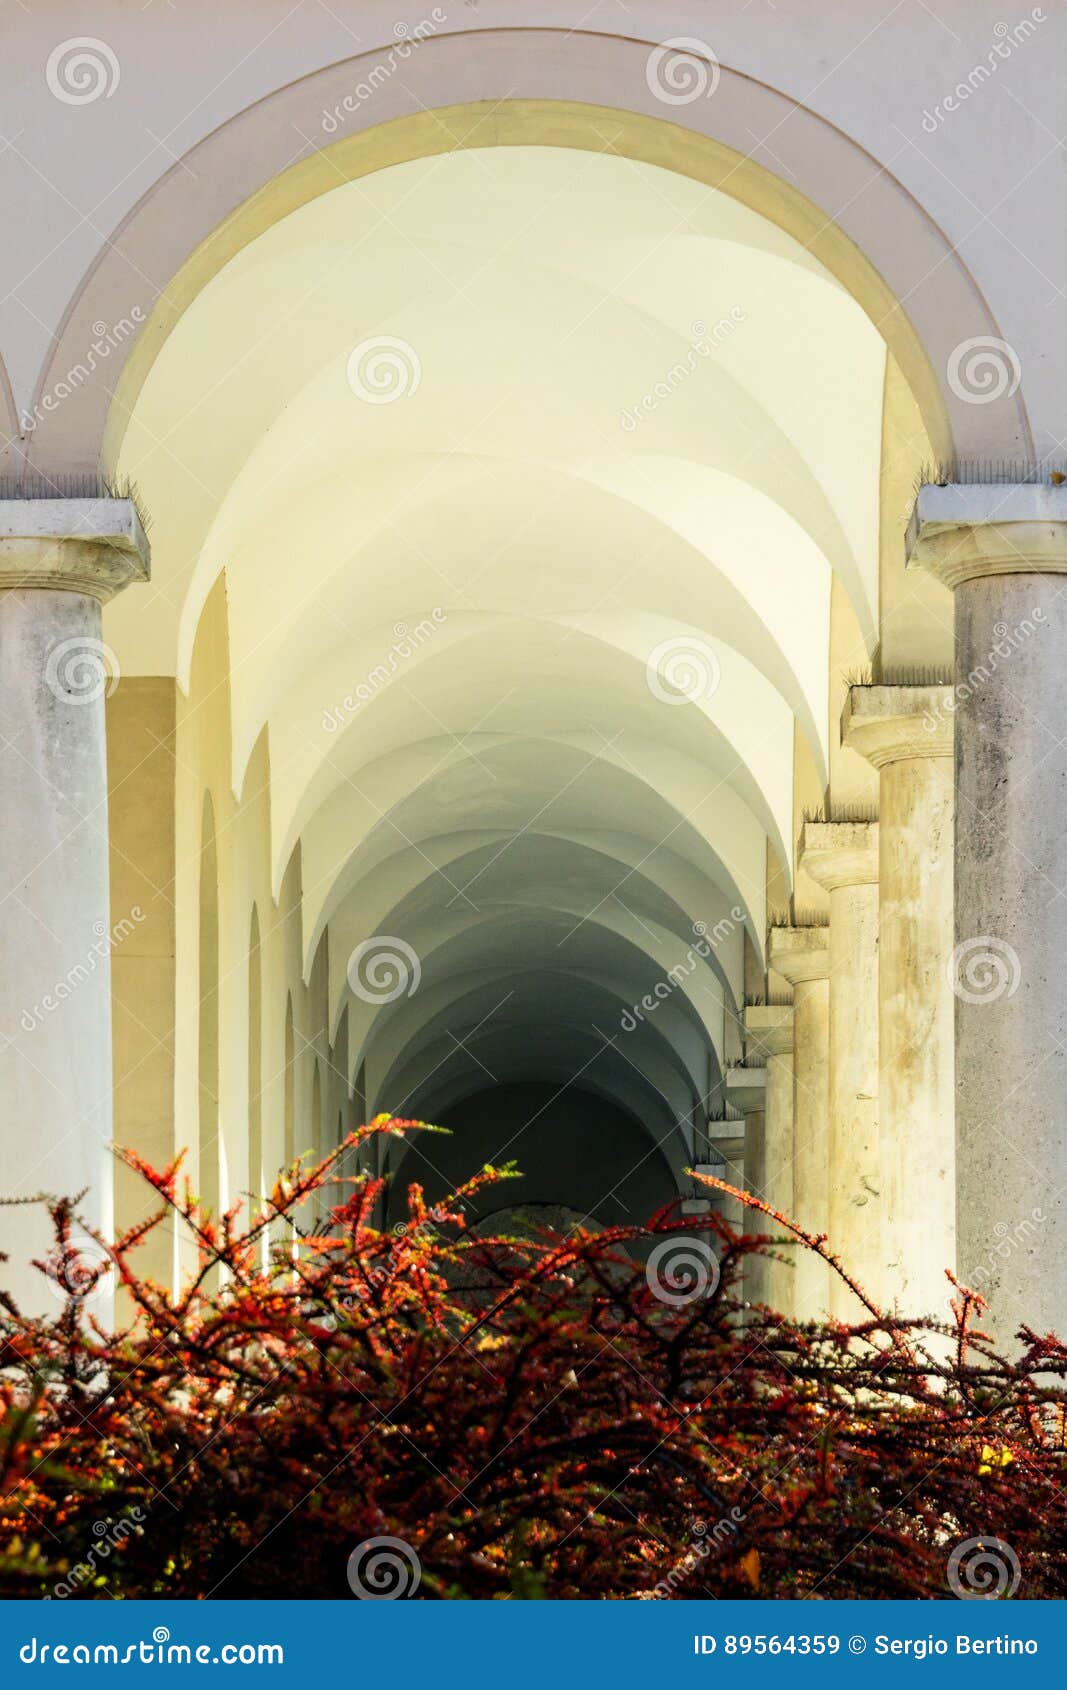 Shrubs In Front Of Arched Corridor Stock Image Image Of